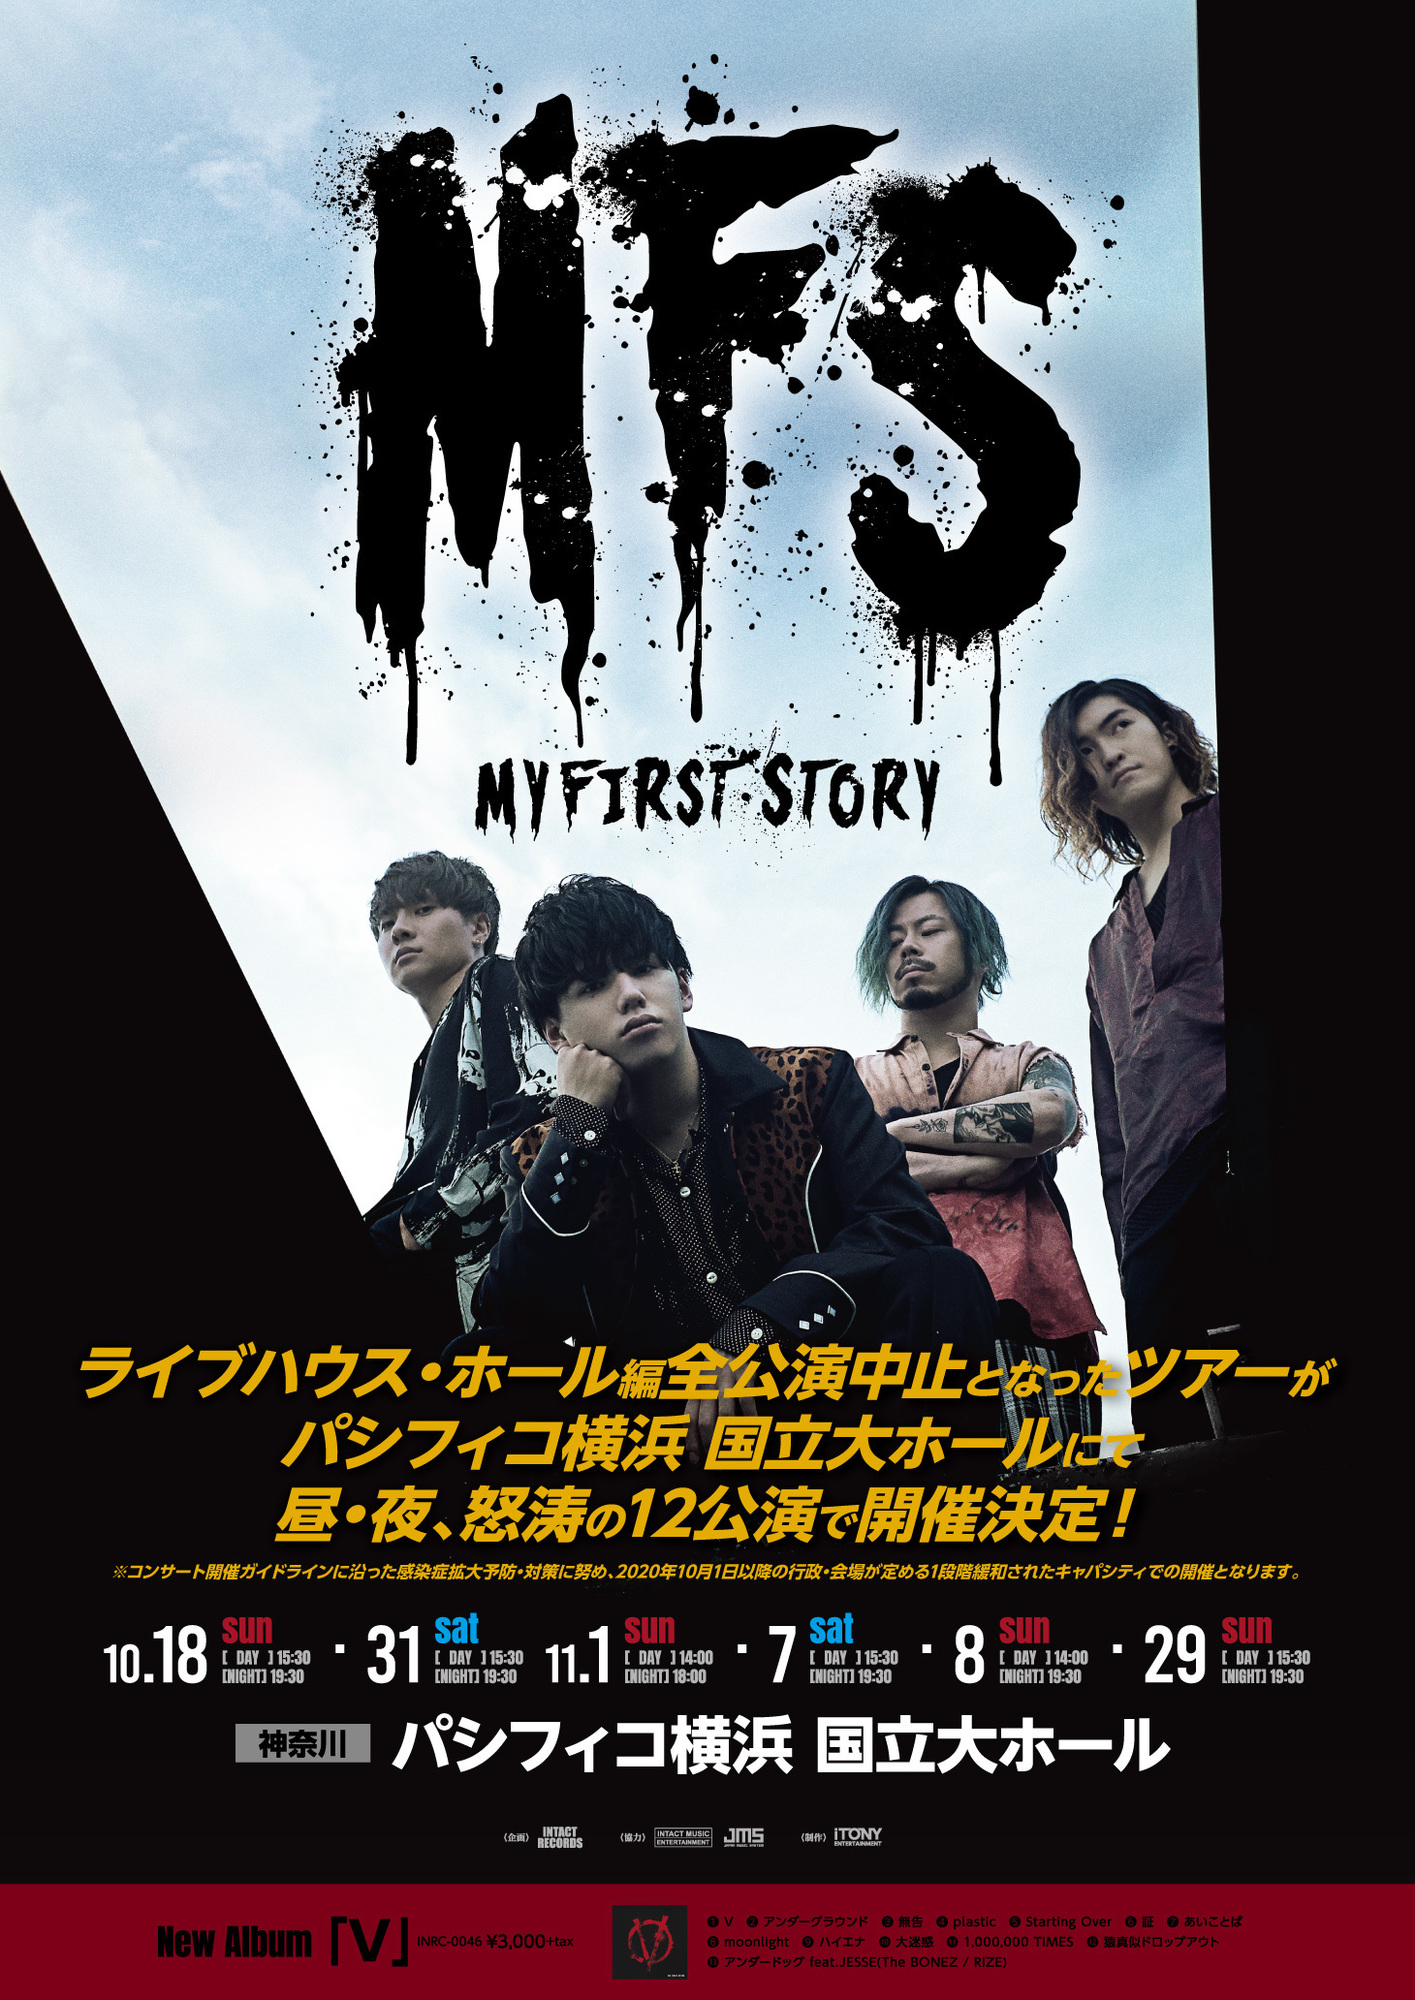 MY FIRST STORY パシフィコ横浜 6days ライブDVD-